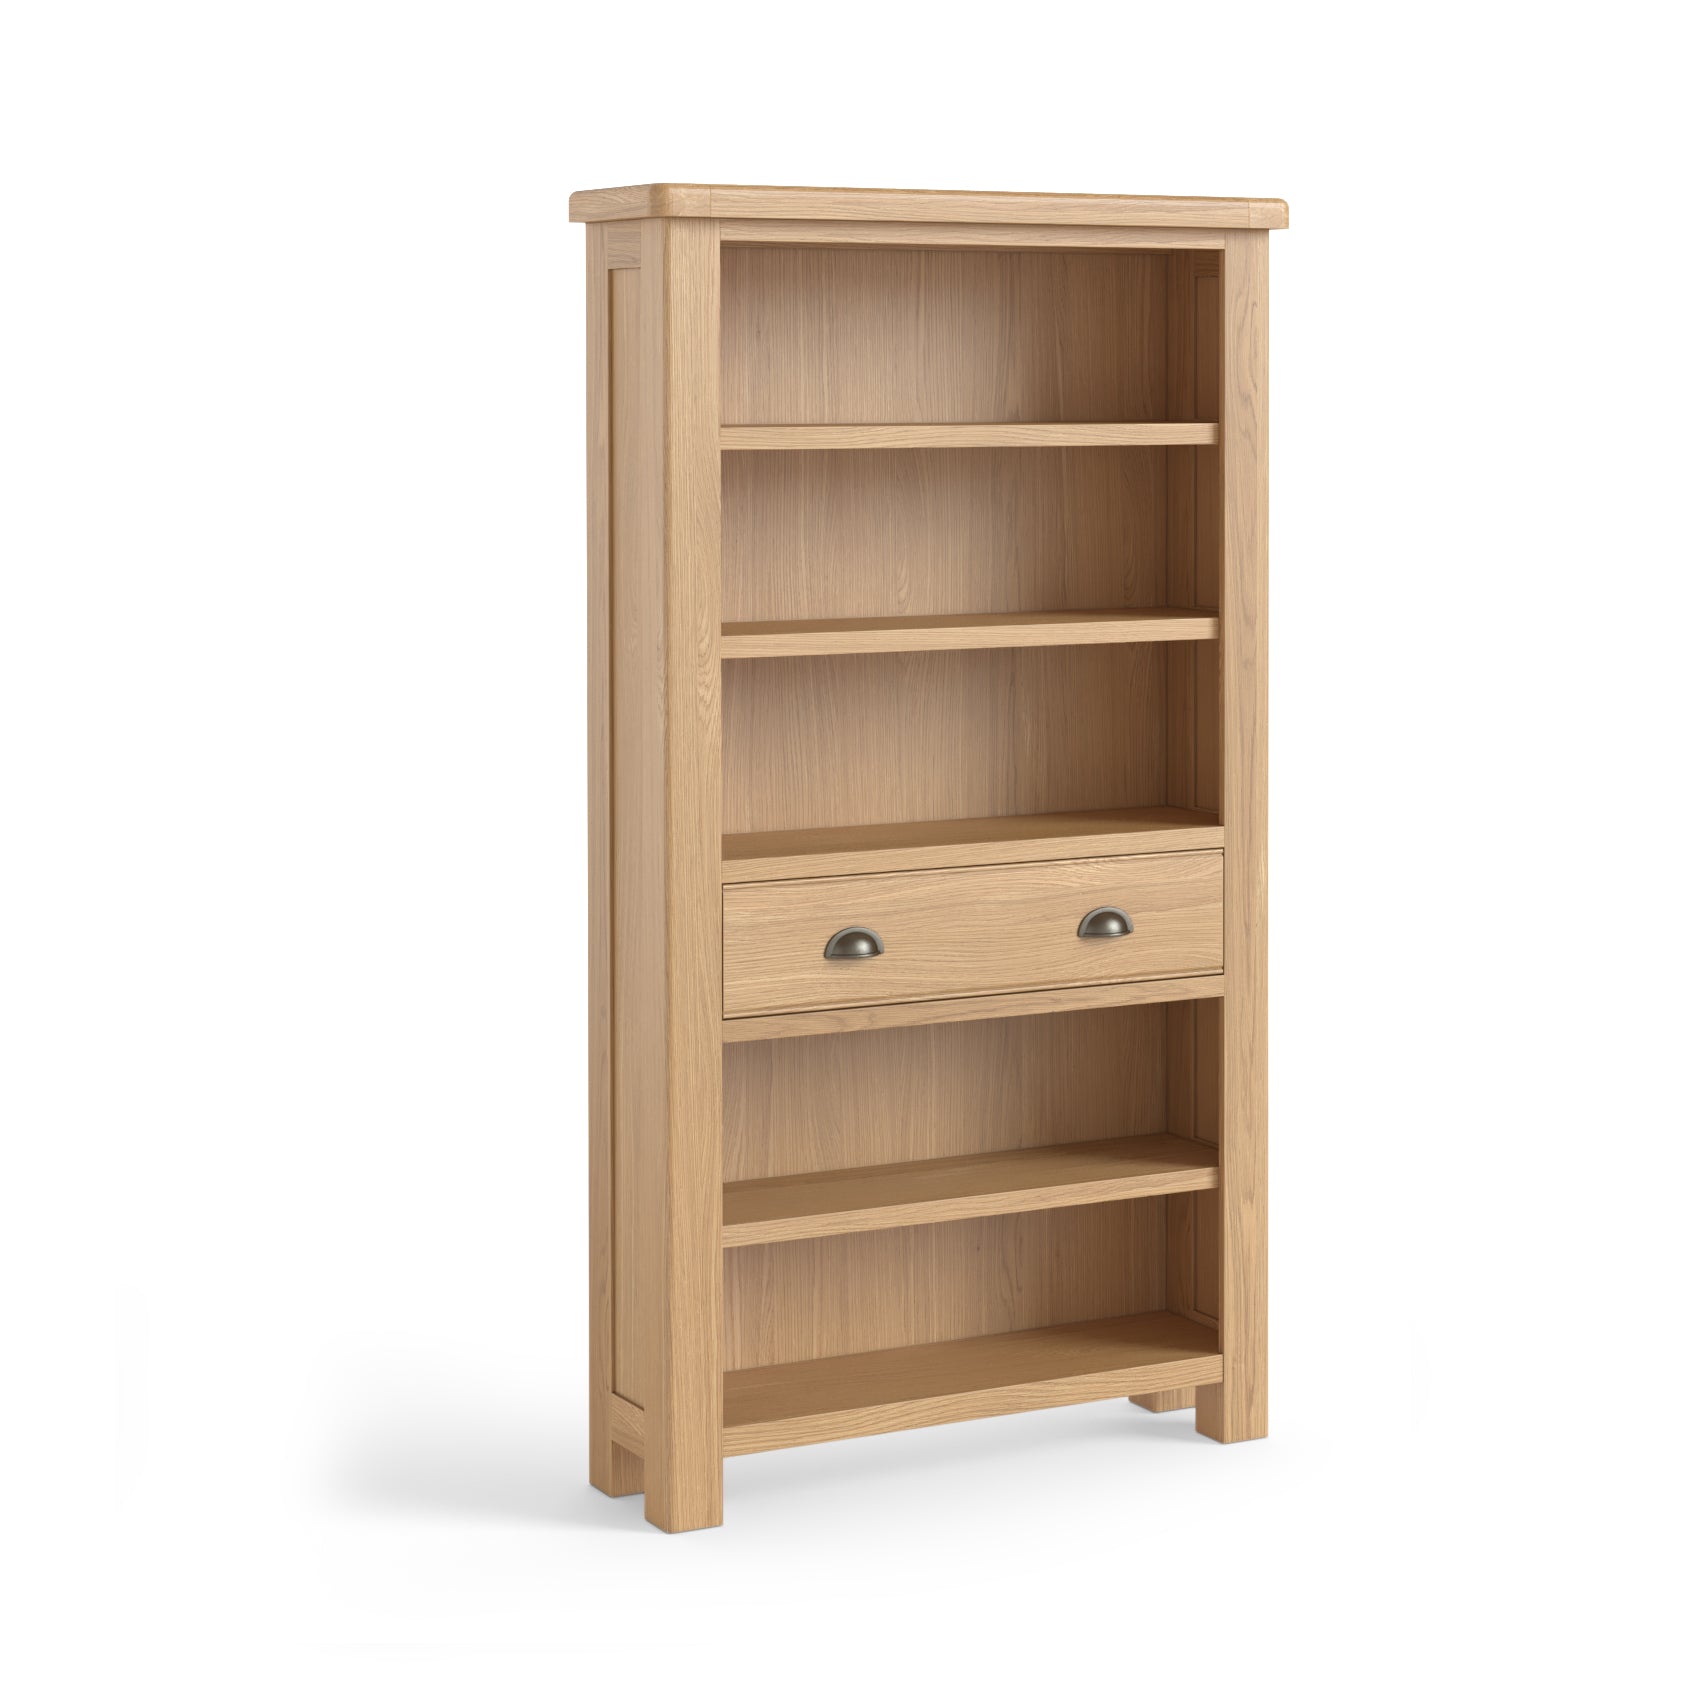 Provence Oak Large Bookcase With Drawer.